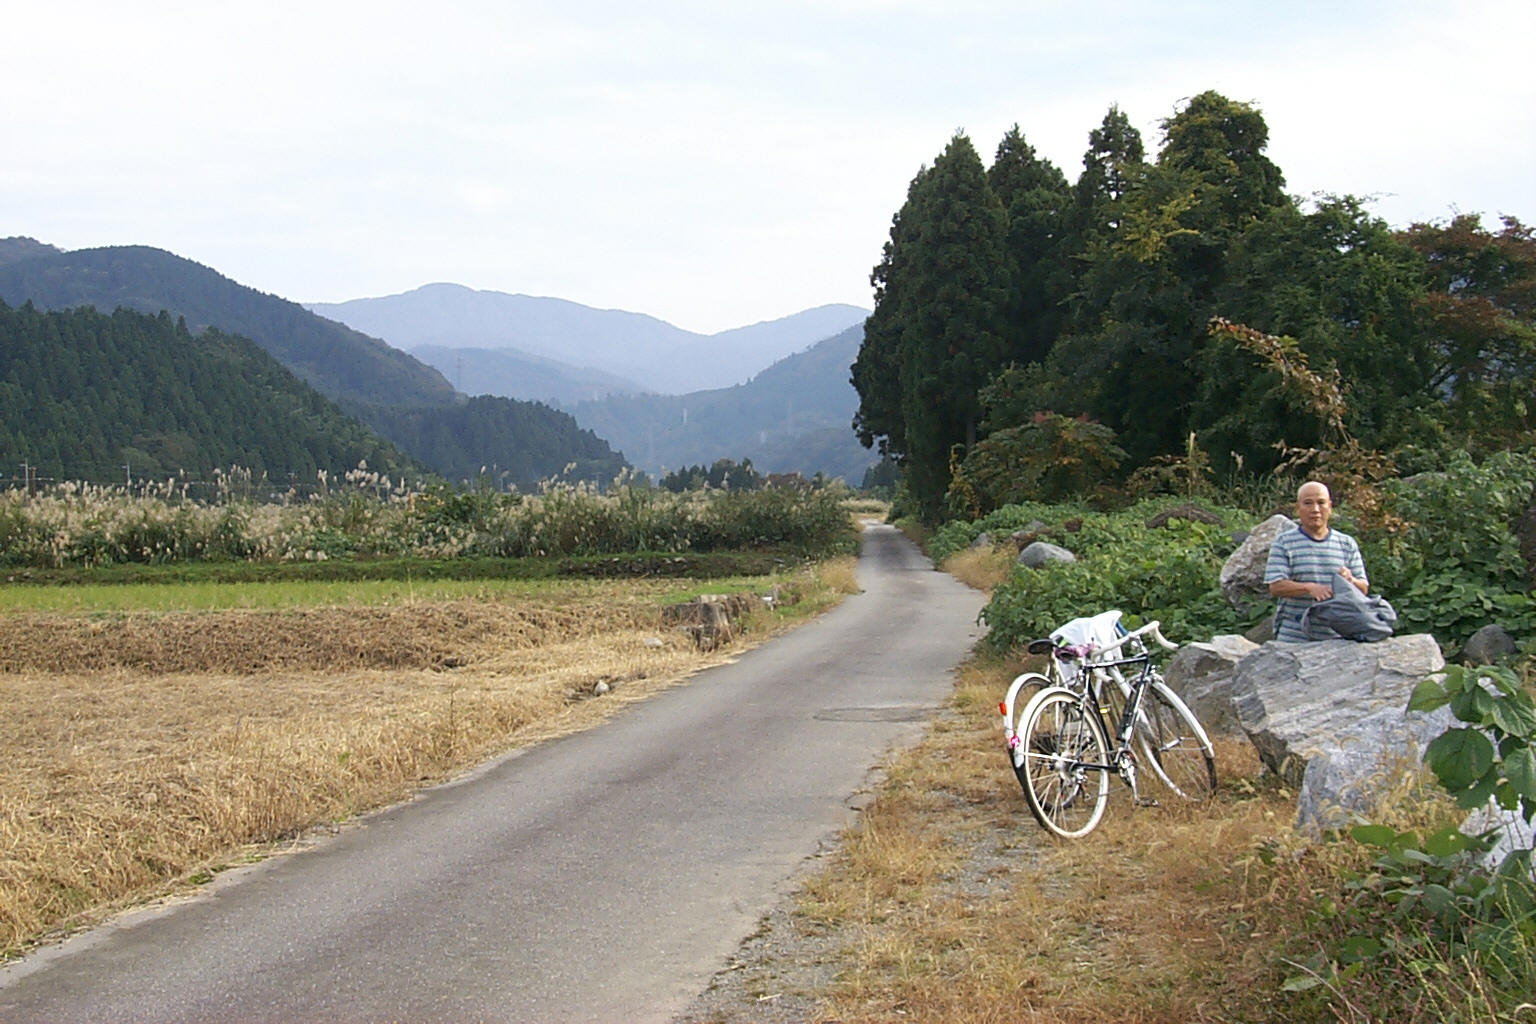 Yasushi Naoe and Kevin Cory cycling in the mountains of Toyama, Japan